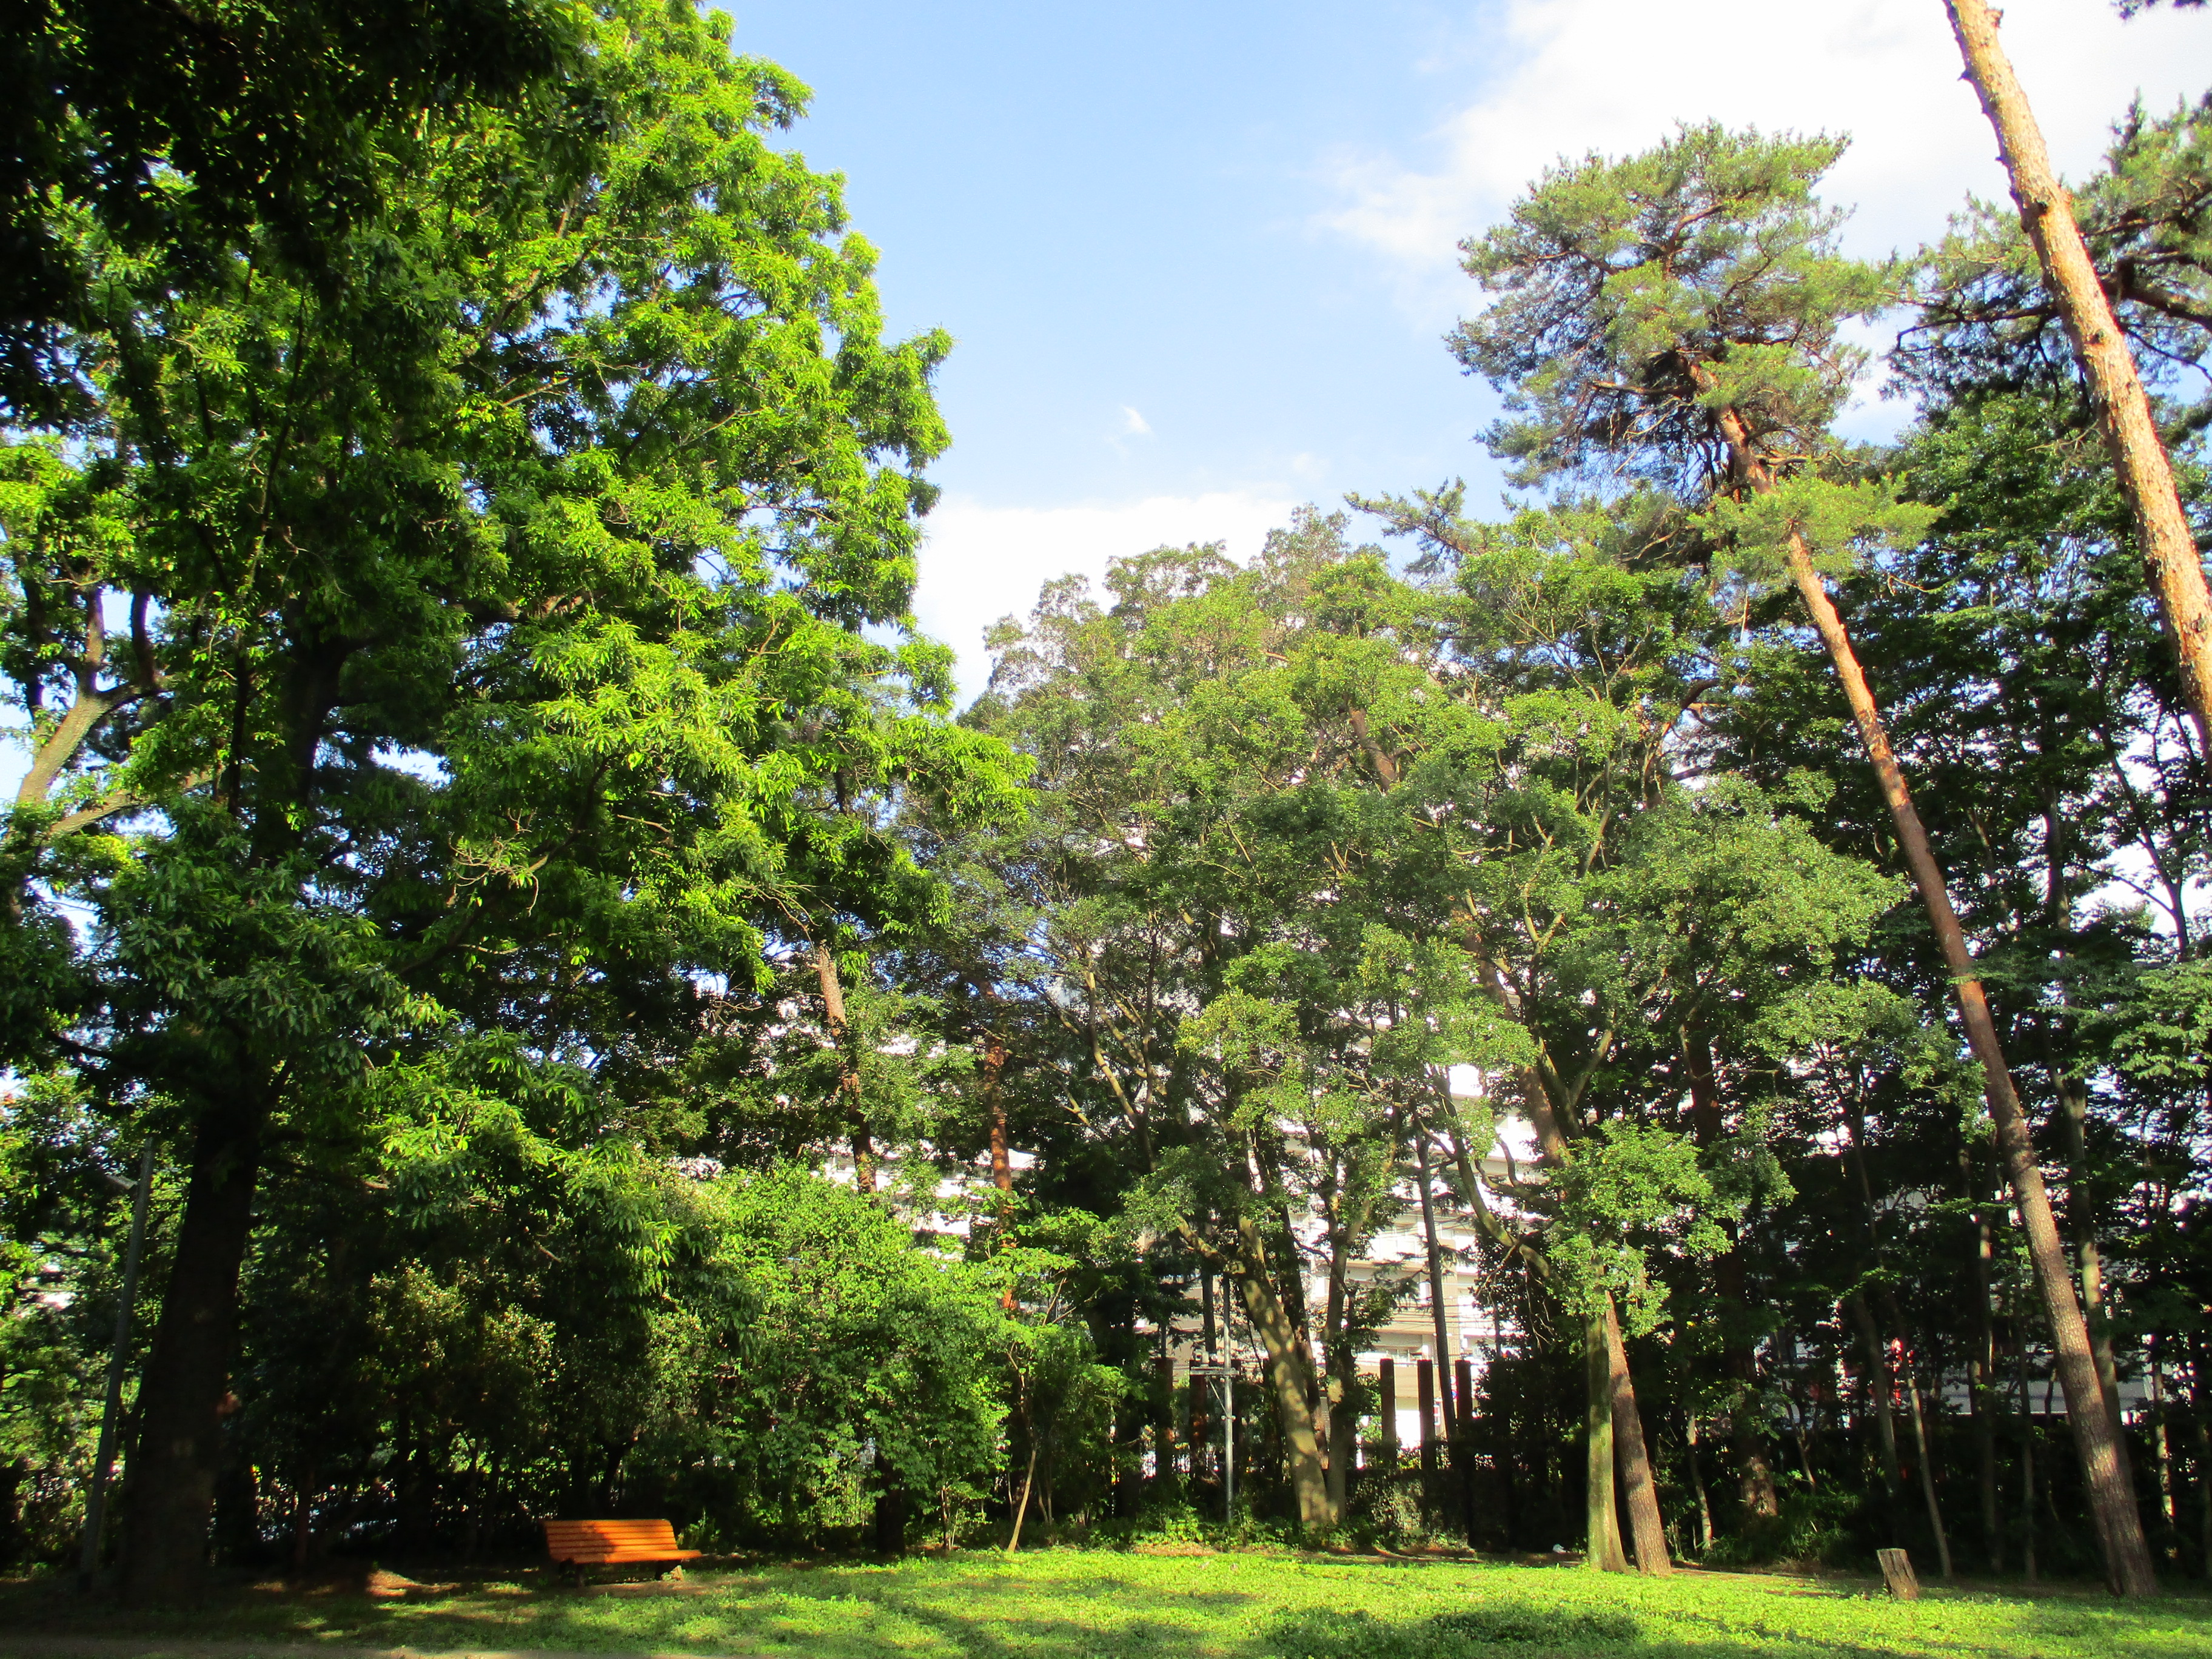 The Hasso-no-Mori (Forest of Ideas) within the larger Musashino Forest at Tokyo’s Tanashi Works has been preserved and opened to the public. SHI's upgrades and renovations in and around manufacturing facilities have played a role in the Group’s efforts to be more environmentally friendly. Credit: Sumitomo Heavy Industries, Ltd.